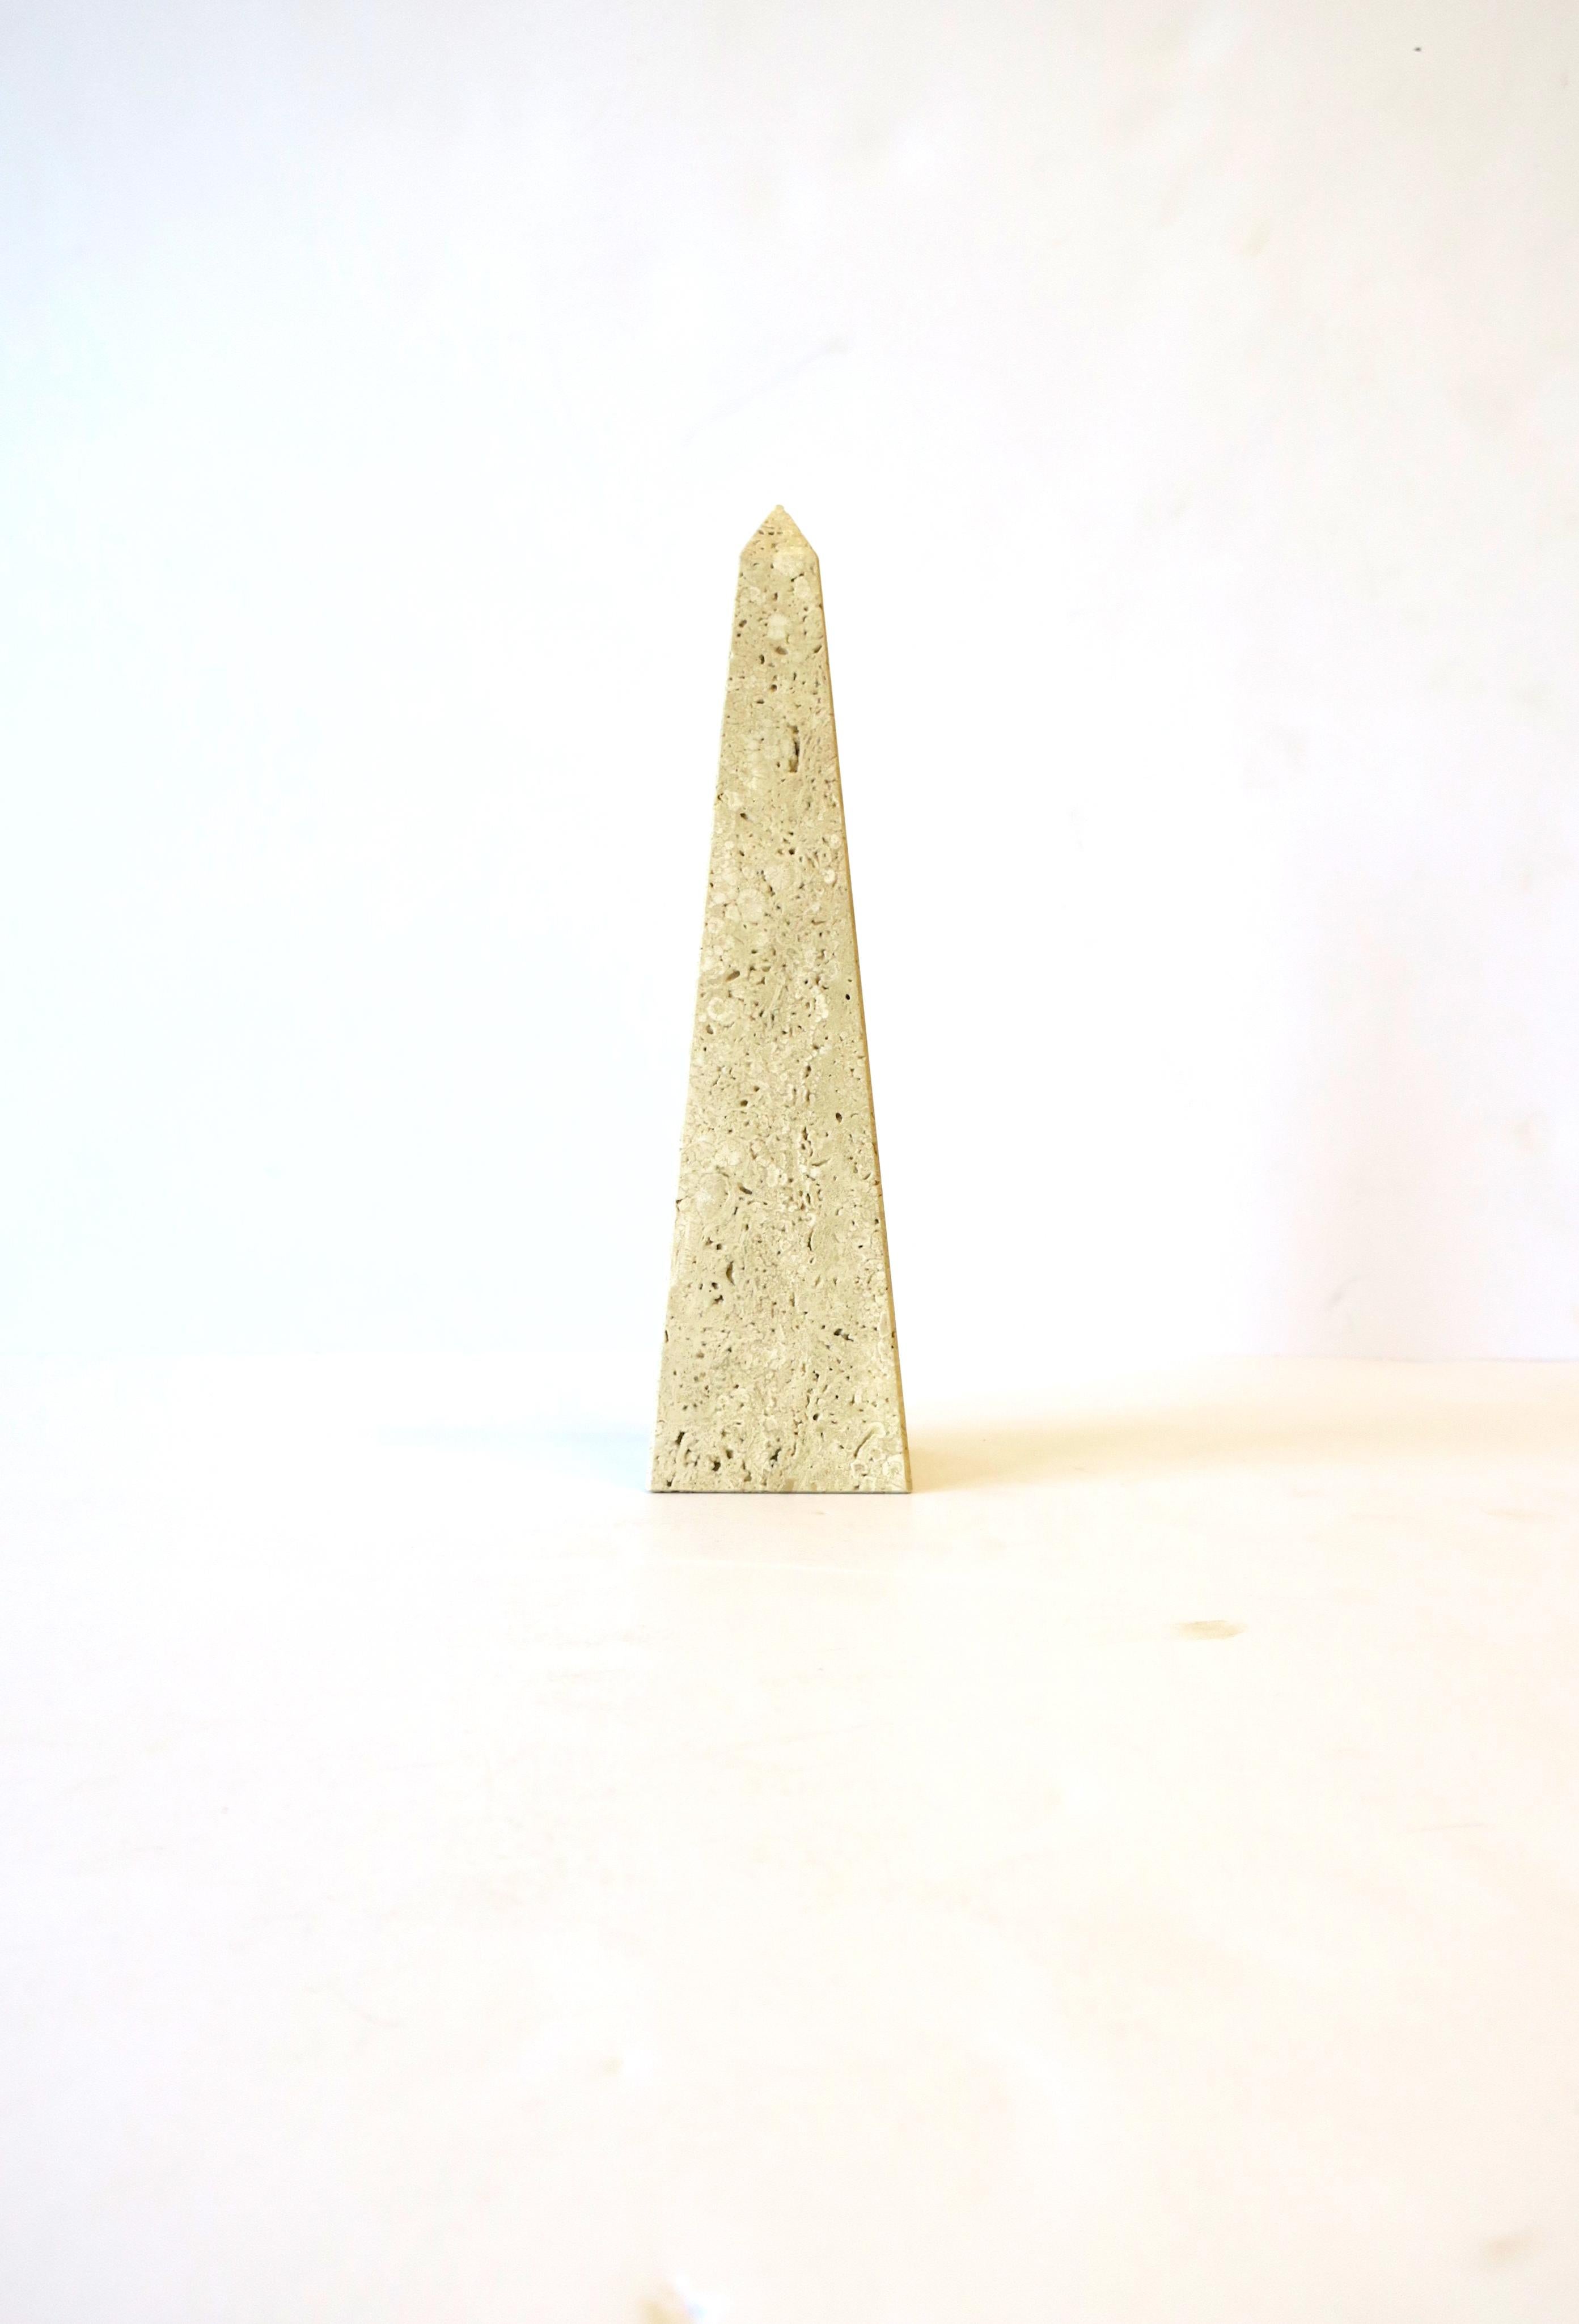 A beautiful Italian travertine marble Obelisk, in the Modern style, circa 1970s, Italy. A great decorative object for a shelf, credenza, office, library, cocktail table, etc. Very good condition as shown in images. Dimensions: 8.5